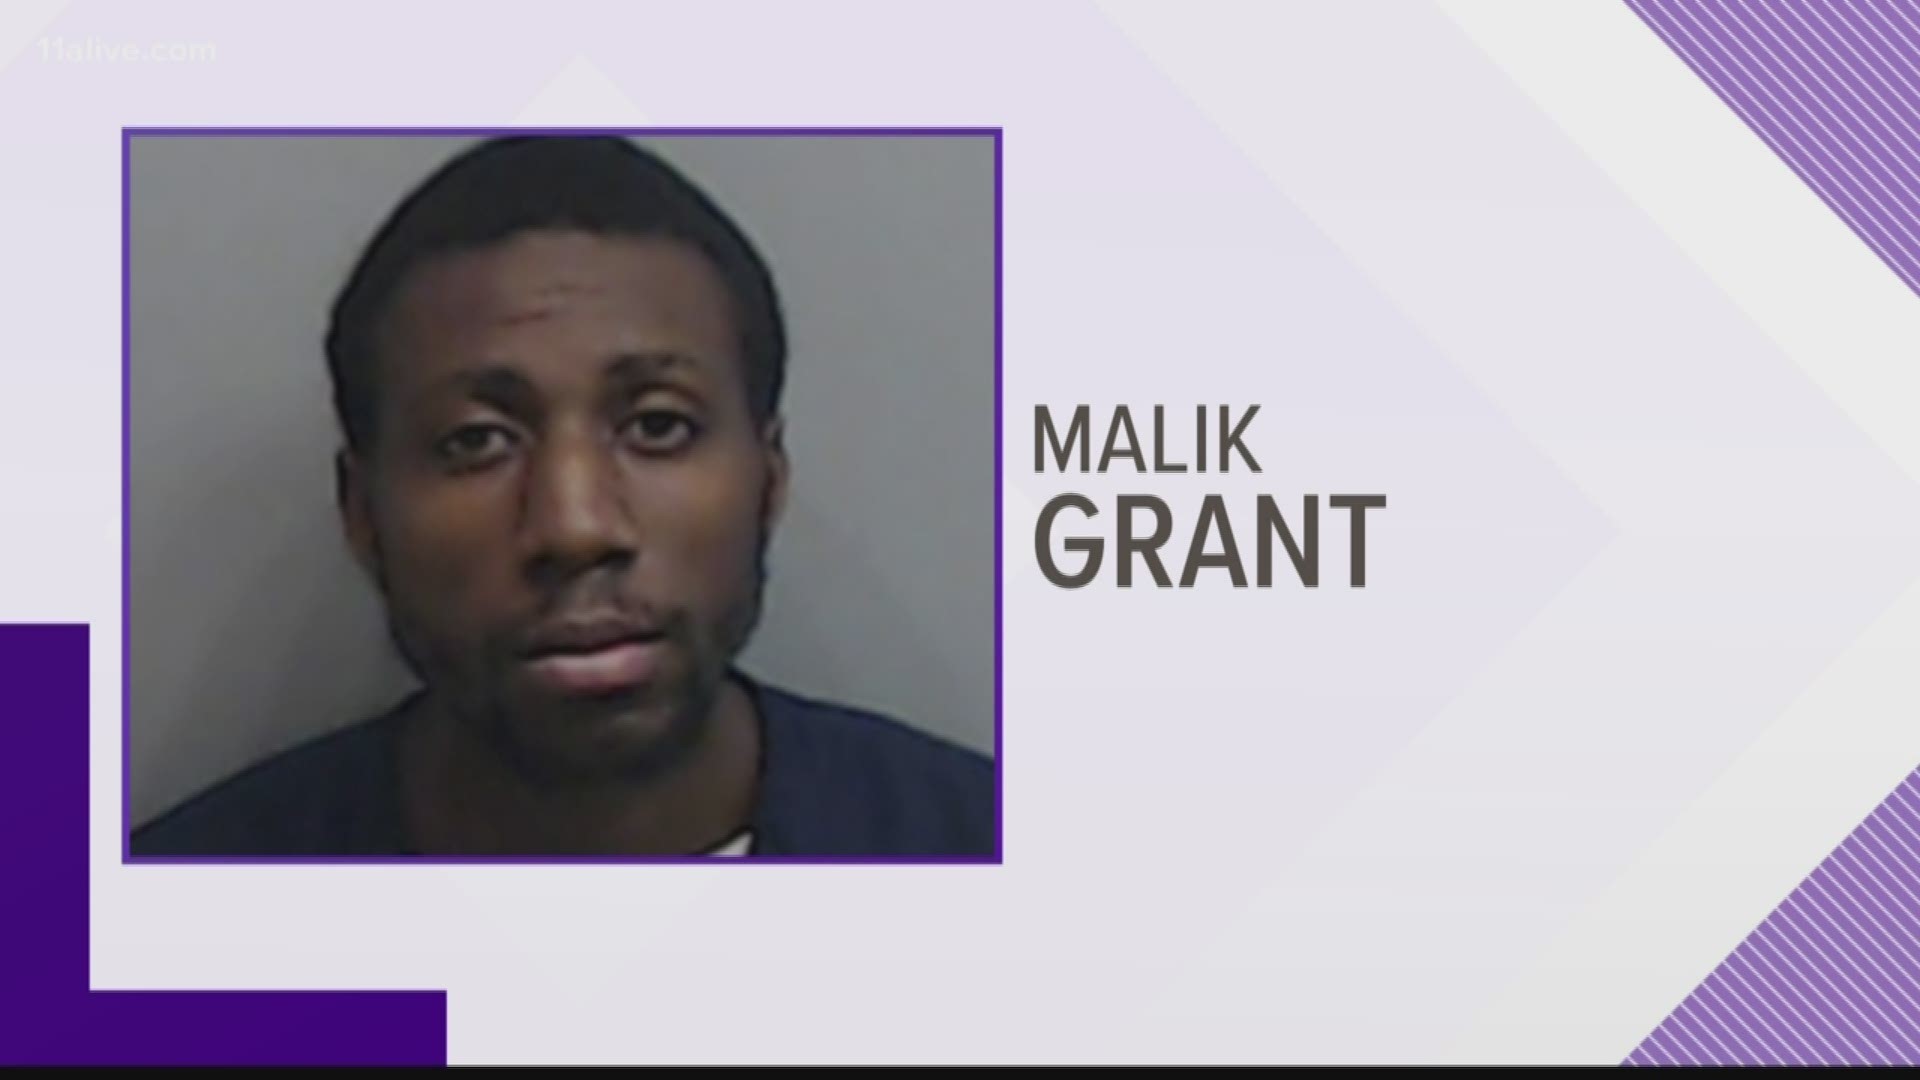 Roswell police arrested 23-year-old Malik Anwar Grant overnight at a Roswell motel.